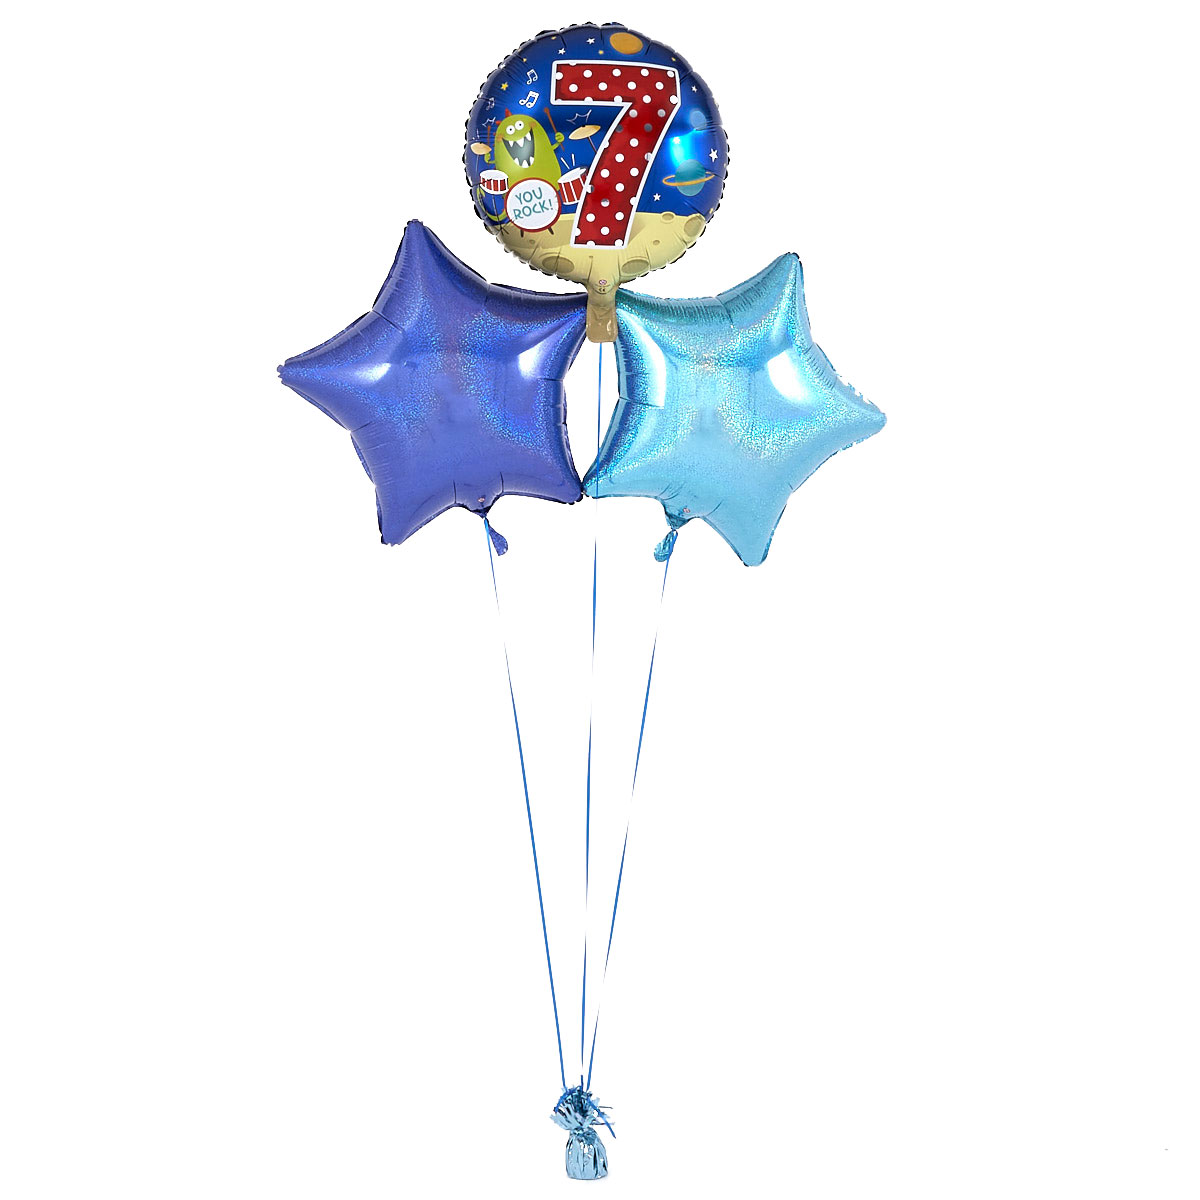 7th Birthday Space Monster Blue Balloon Bouquet - DELIVERED INFLATED!